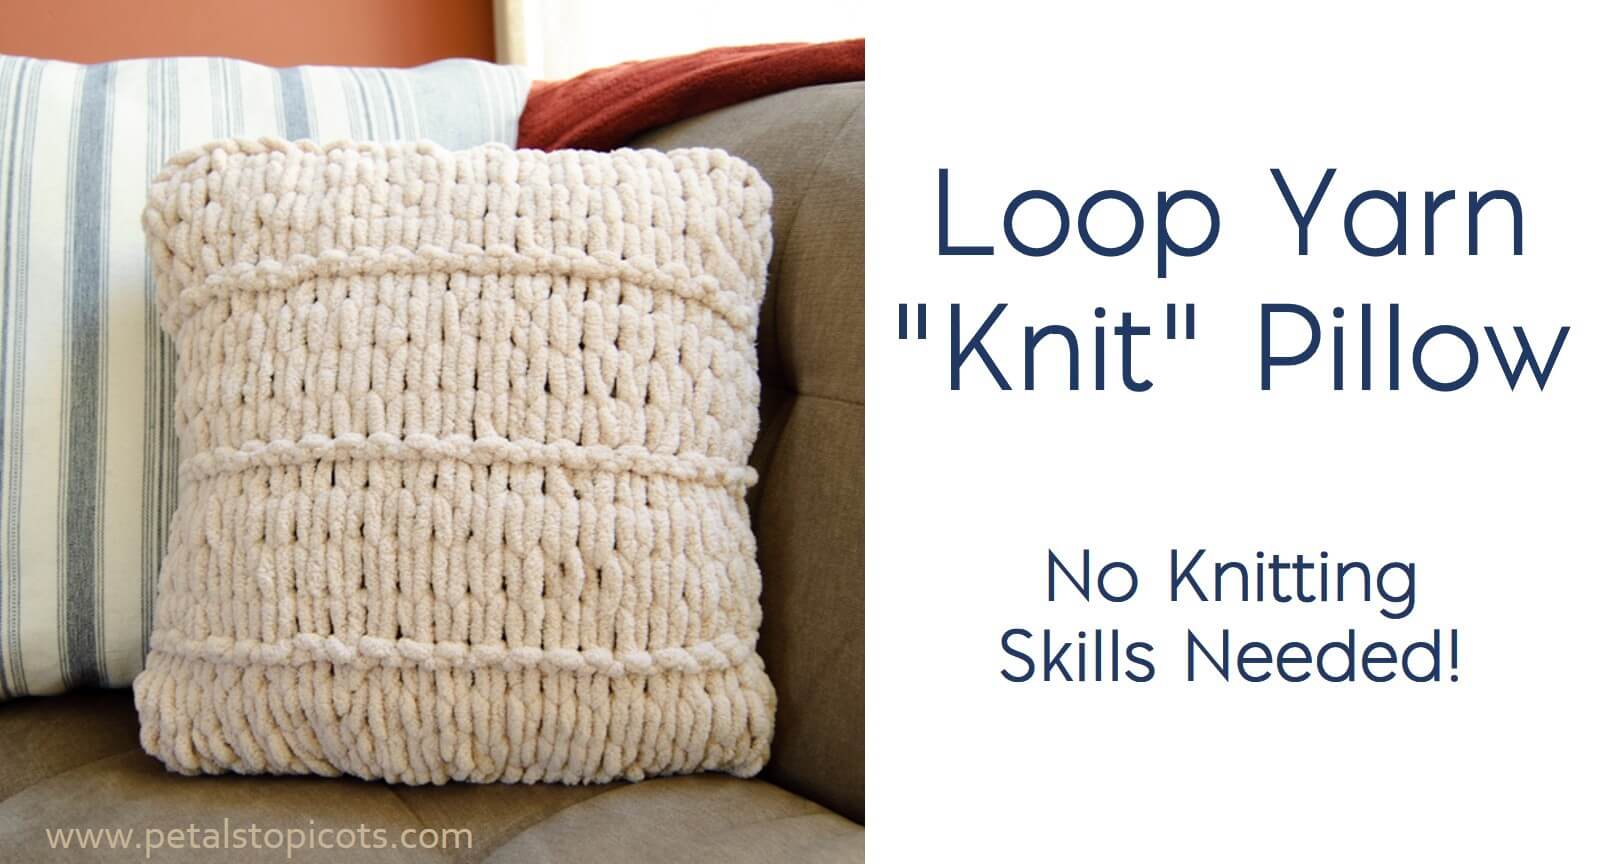 Loop Yarn Knit Pillow: Easy Finger Knitting Project - Petals to Picots